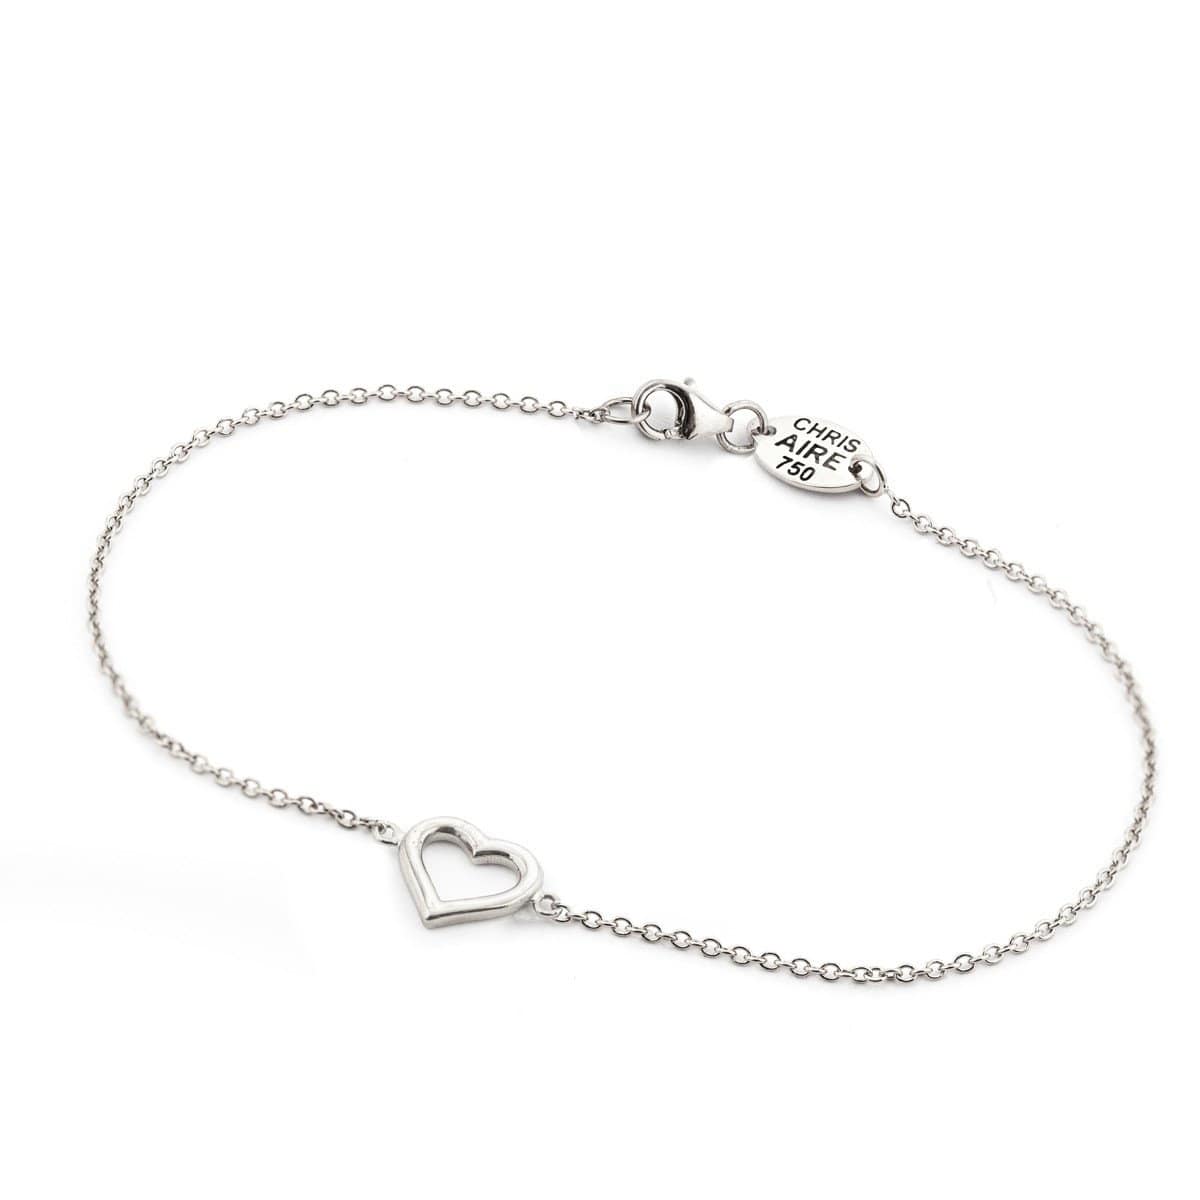 WHITE GOLD HEART BRACELET - Chris Aire Fine Jewelry & Timepieces